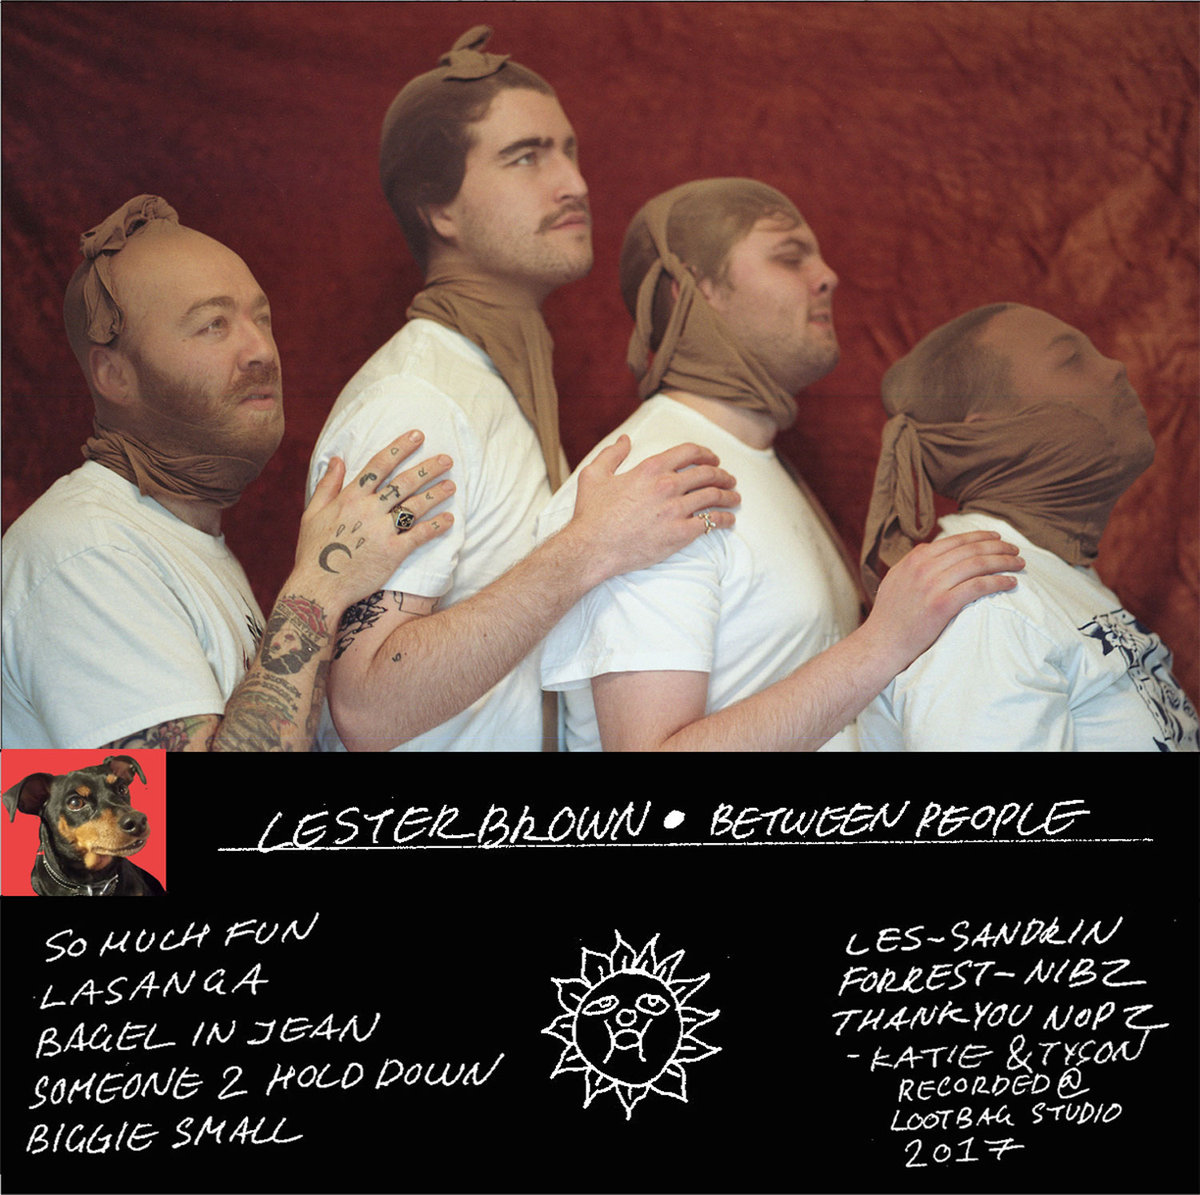 New EP Between People by Lester Brown now on LootBag